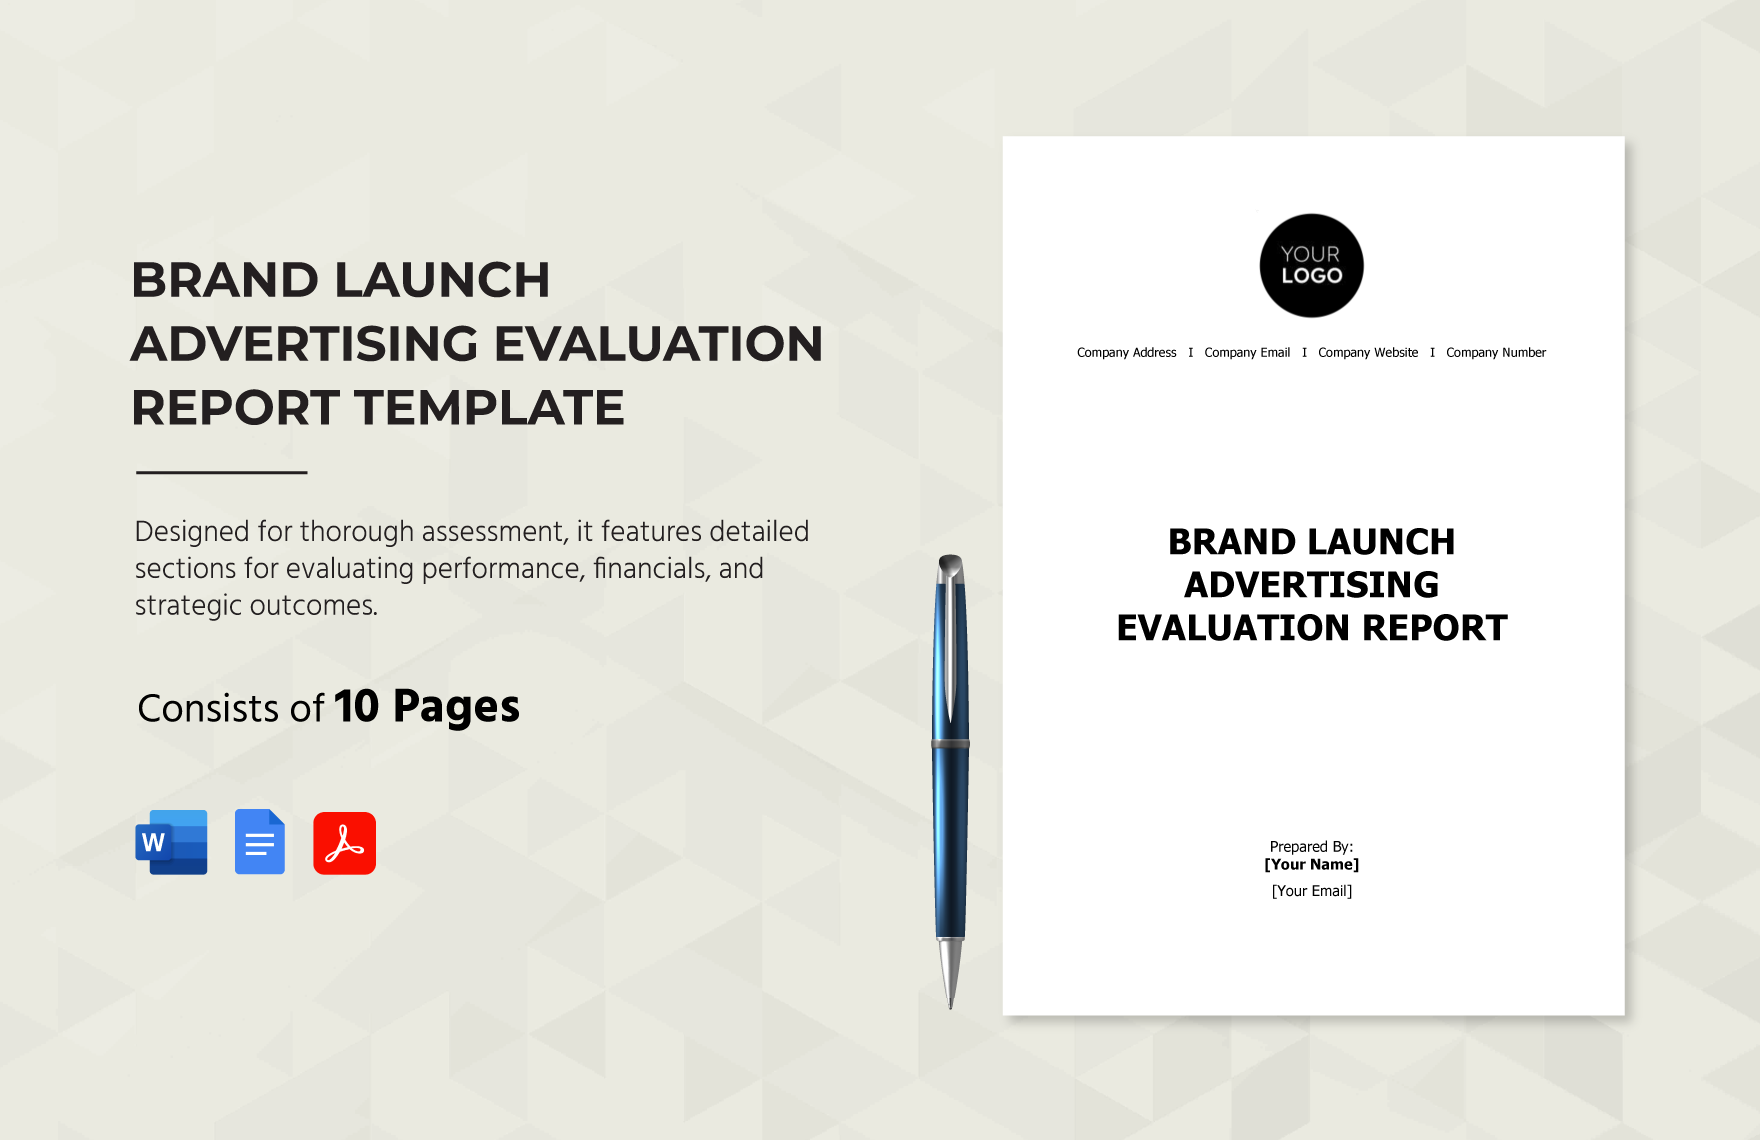 Brand Launch Advertising Evaluation Report Template